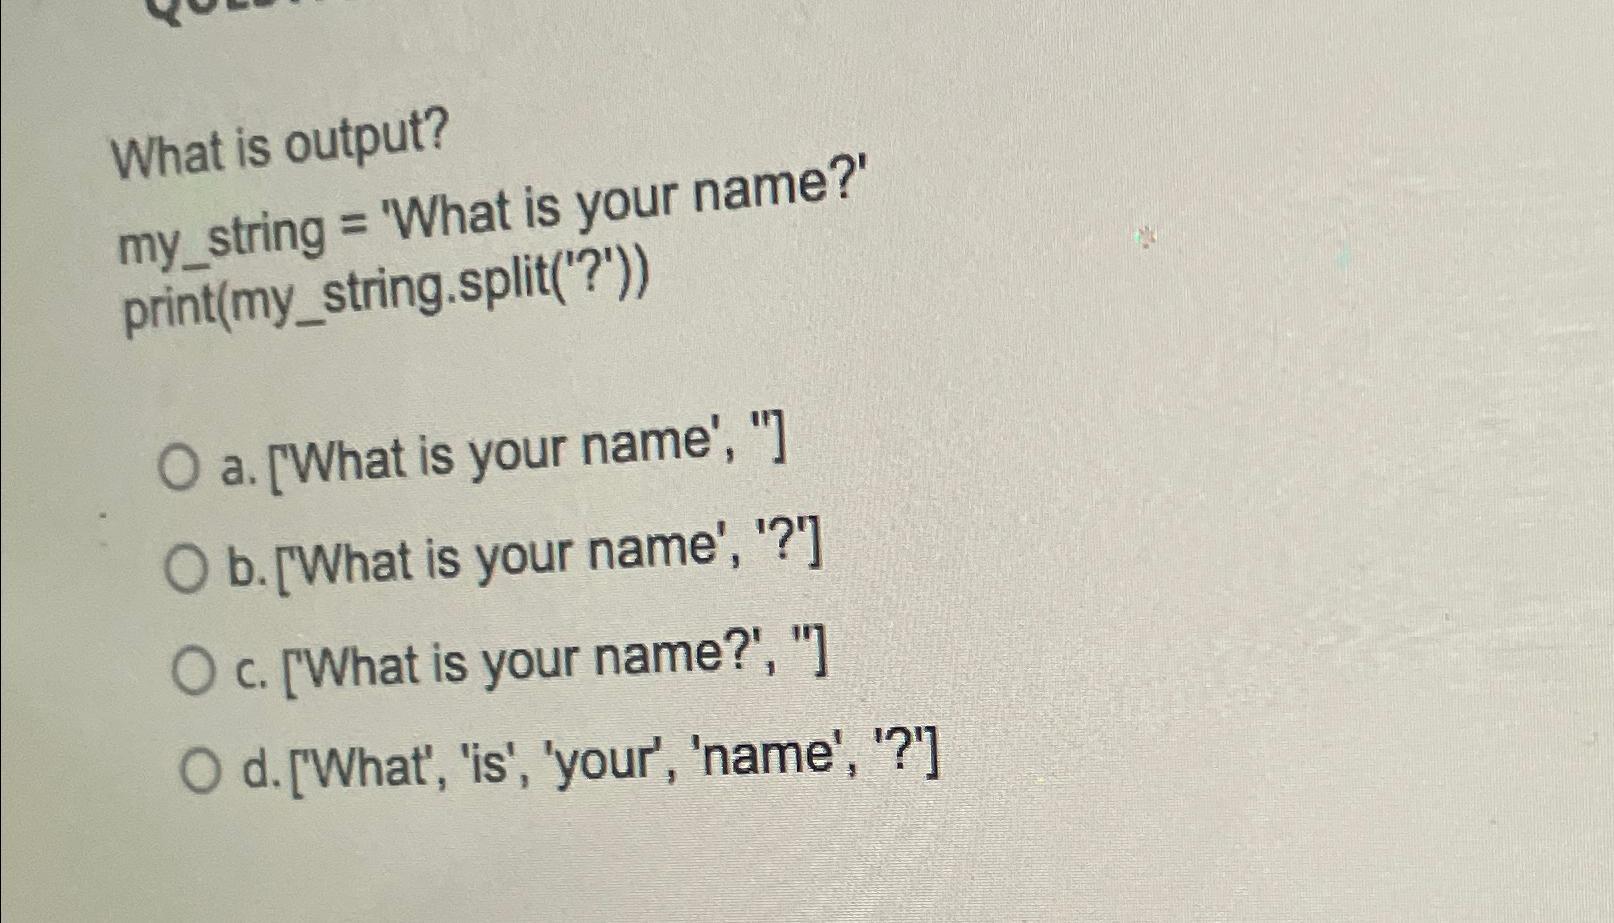 What is output? my_string = 'What is your name?' print(my_string.split('?')) O a. [What is your name', 